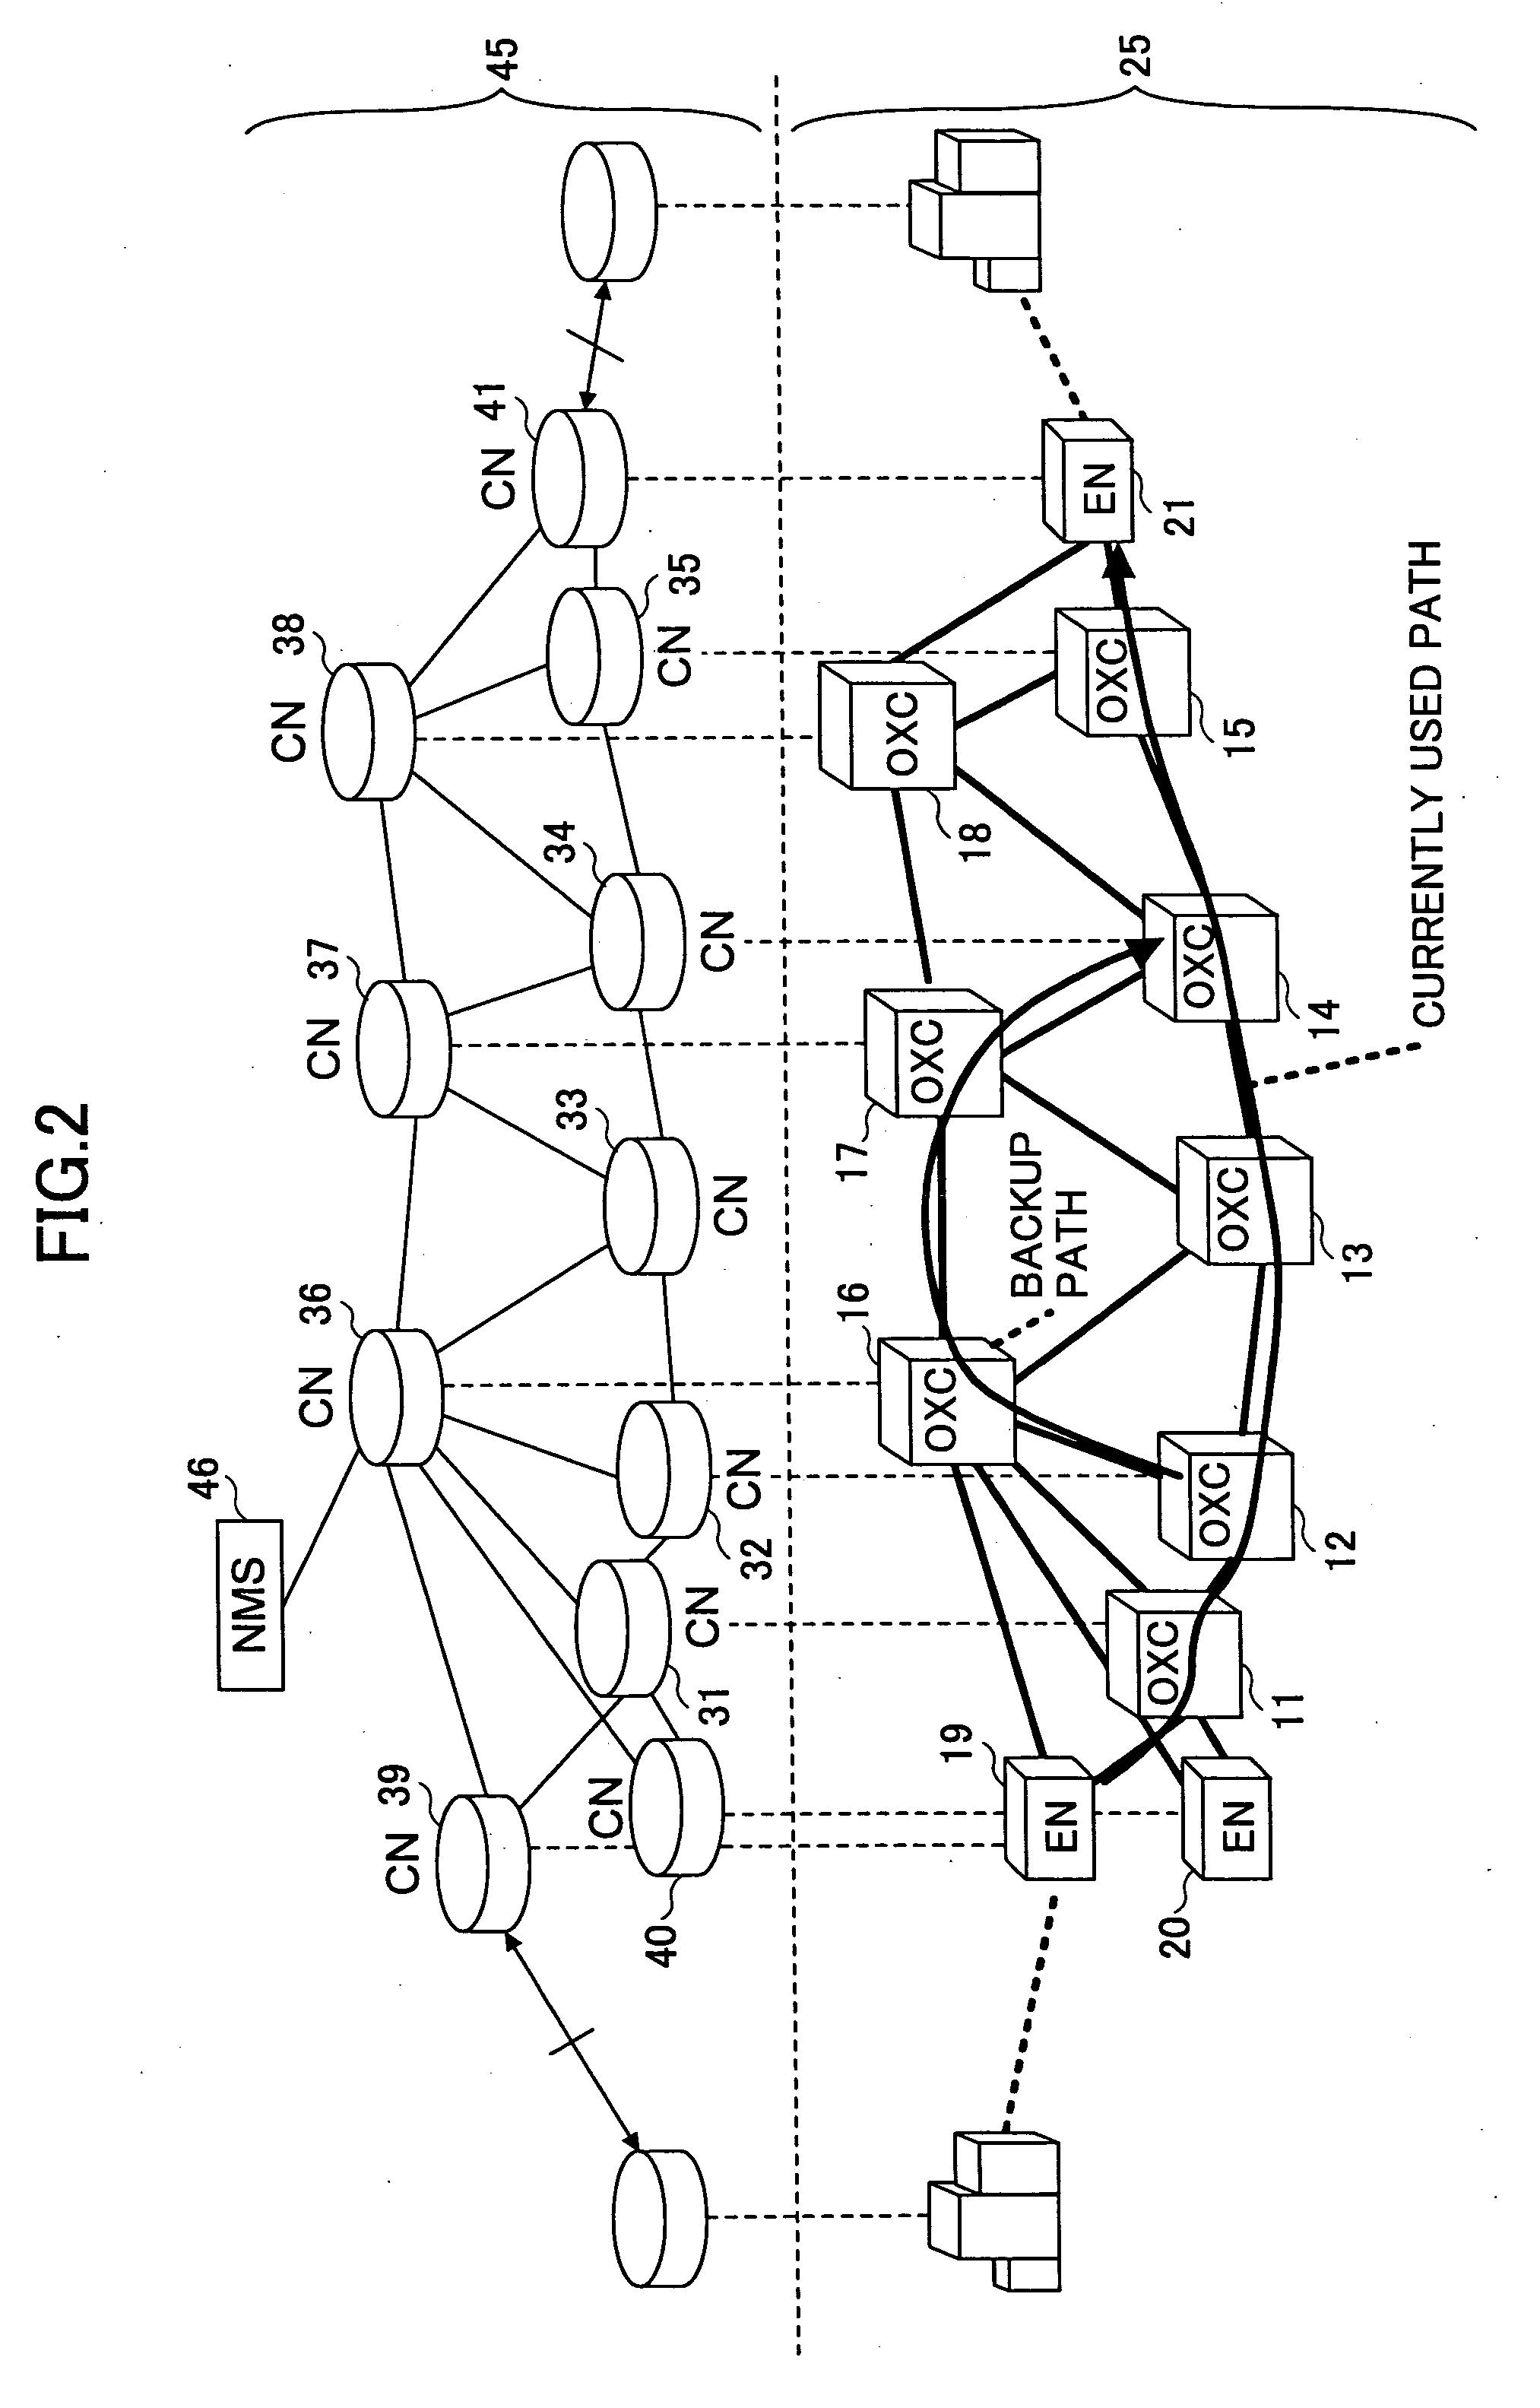 Method of and control node for detecting failure